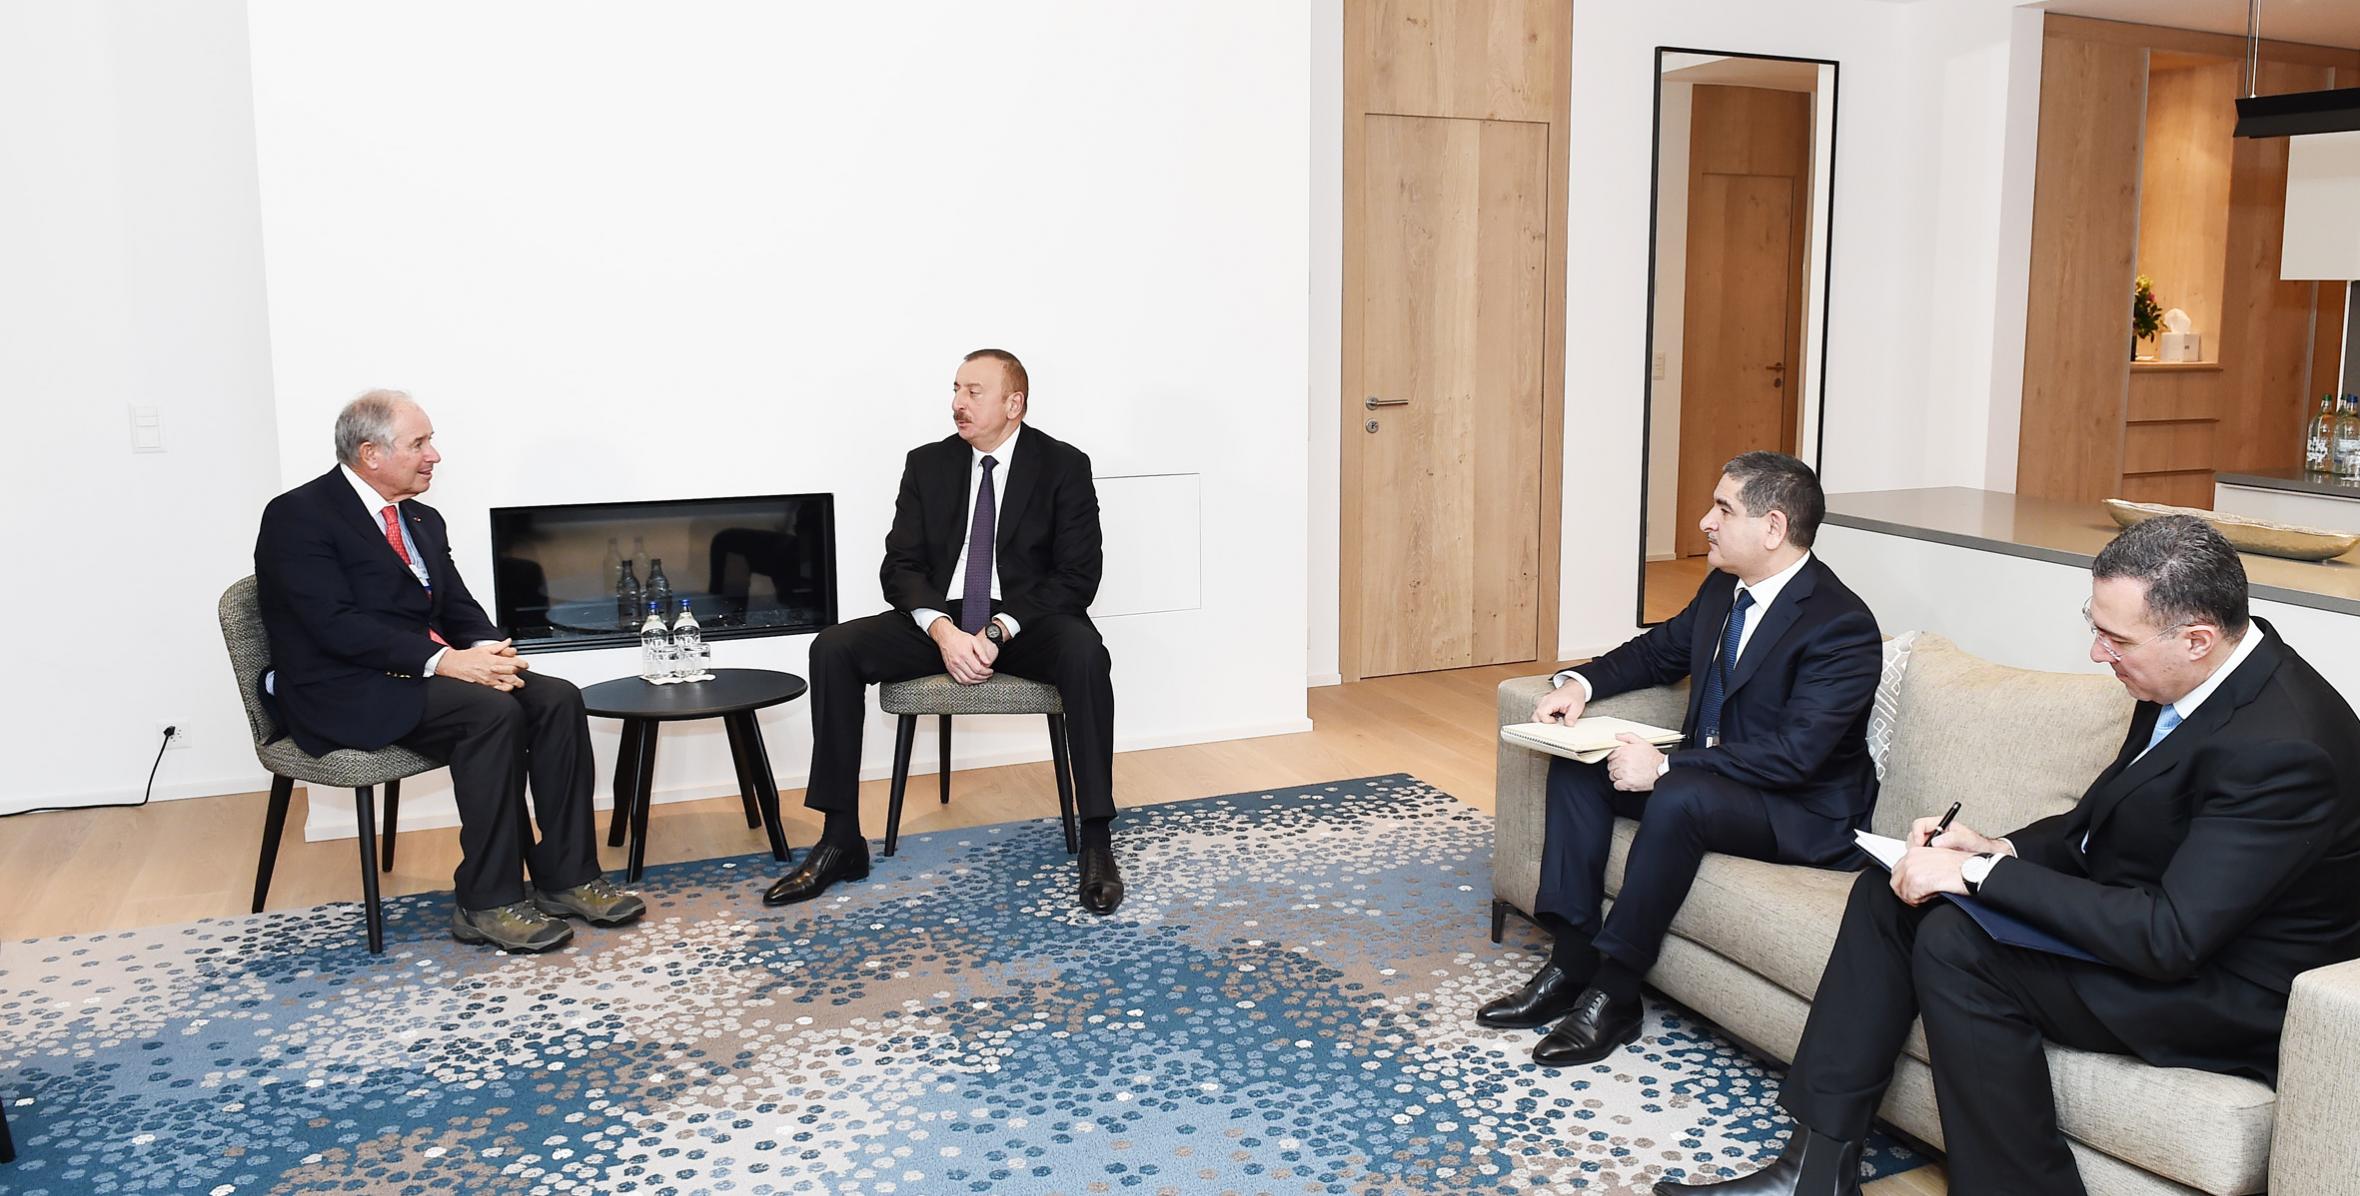 Ilham Aliyev met with Chairman, CEO and Co-Founder of American company Blackstone